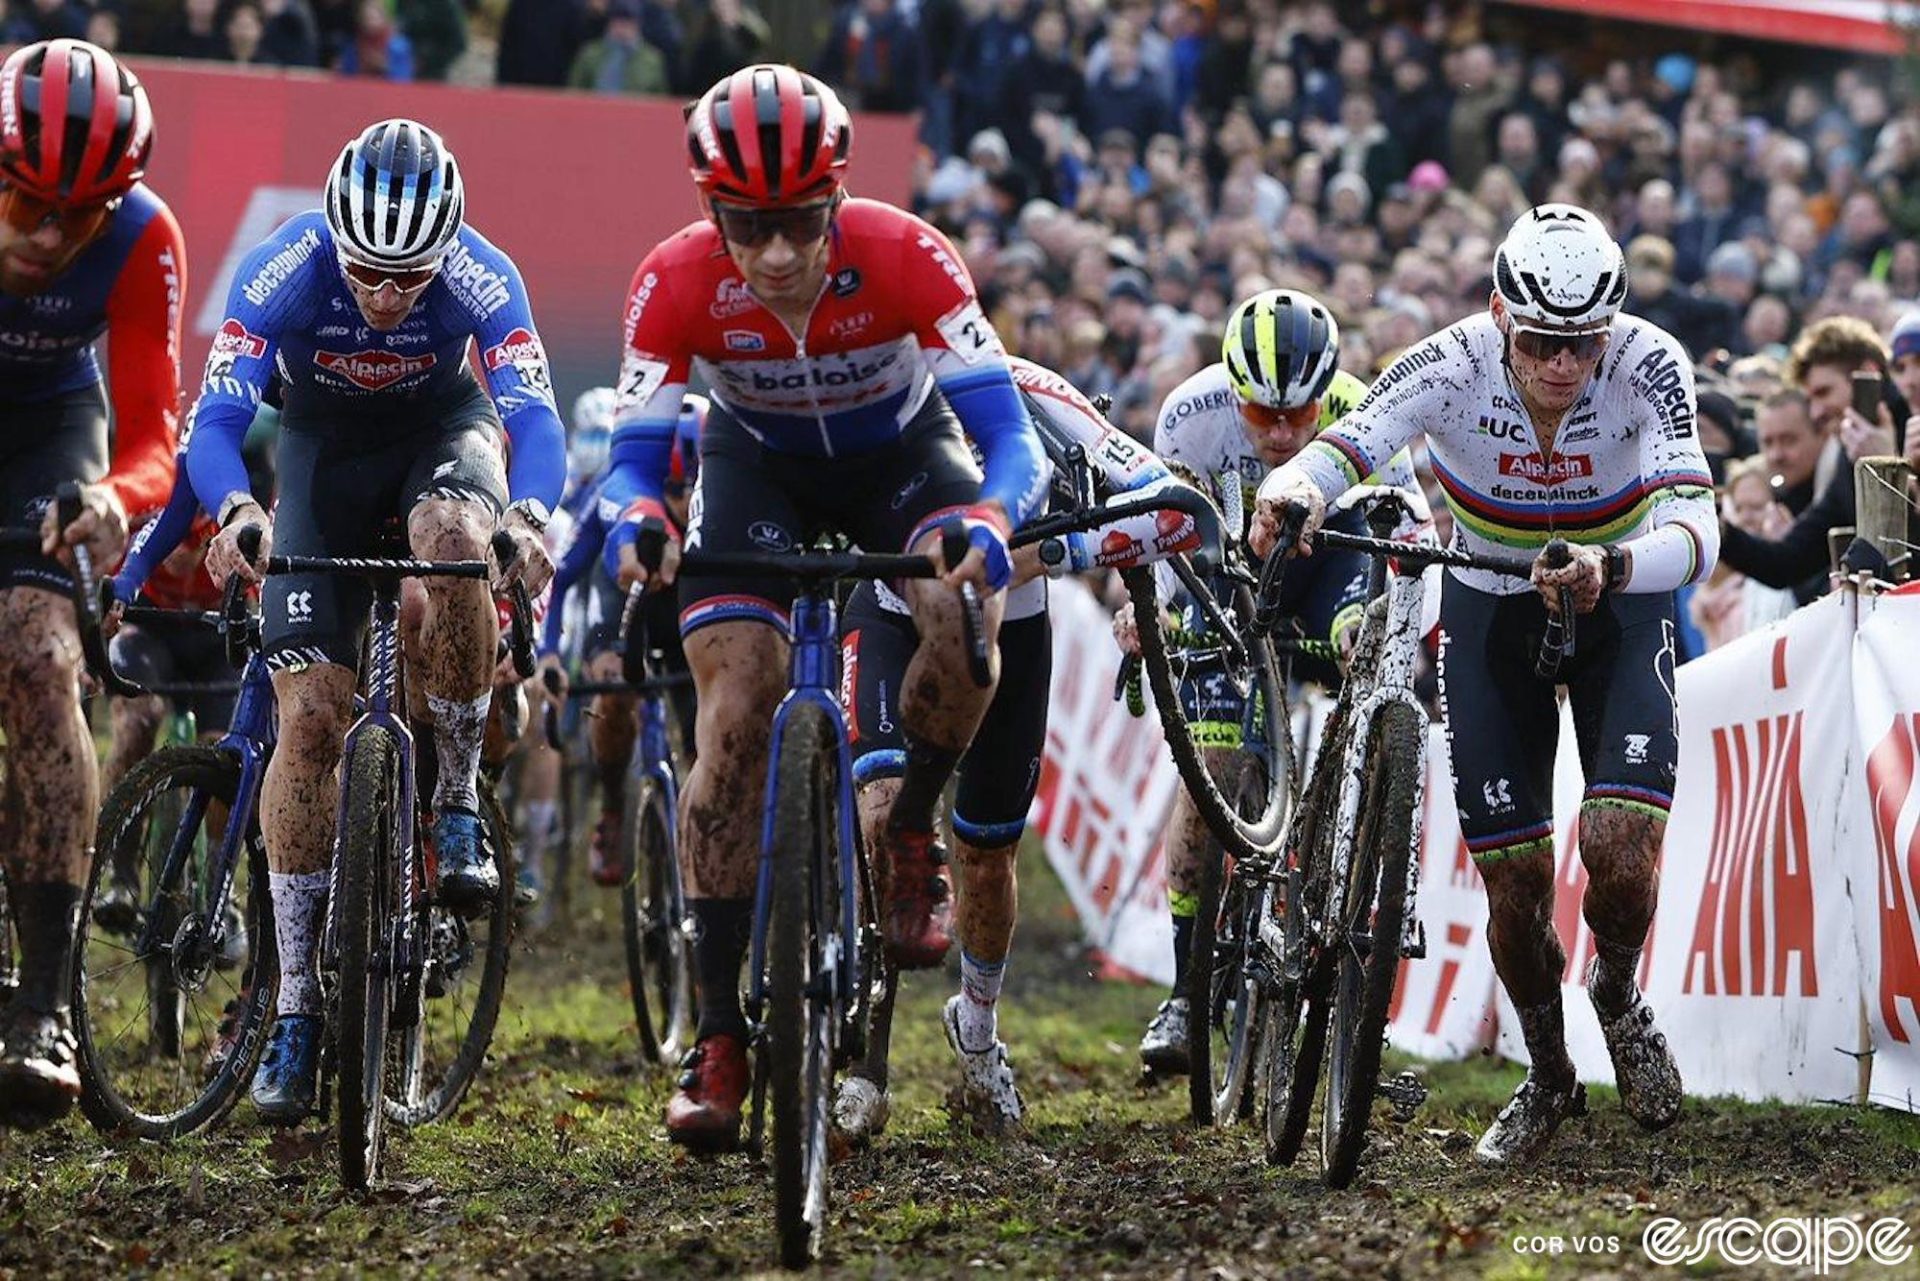 Mathieu van der Poel pushes his bike up a muddy section in traffic at Gavere.